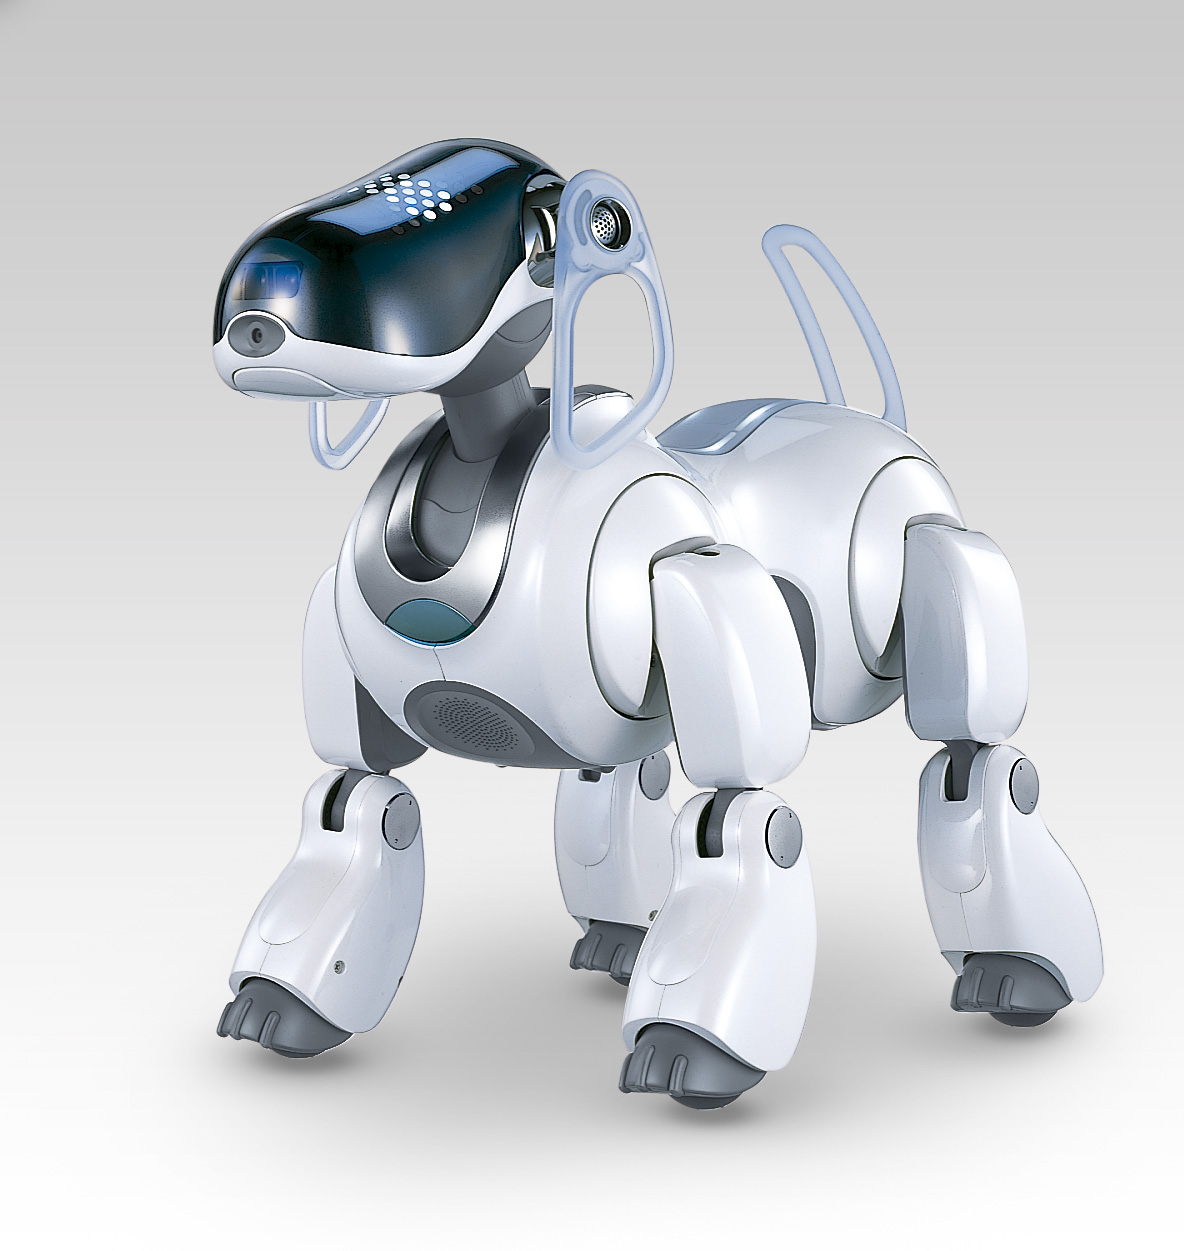 Aibo ERS-7 - Picture: /uploads/images/robots/robotpictures-all/AIBO-ERS-7_001.jpg